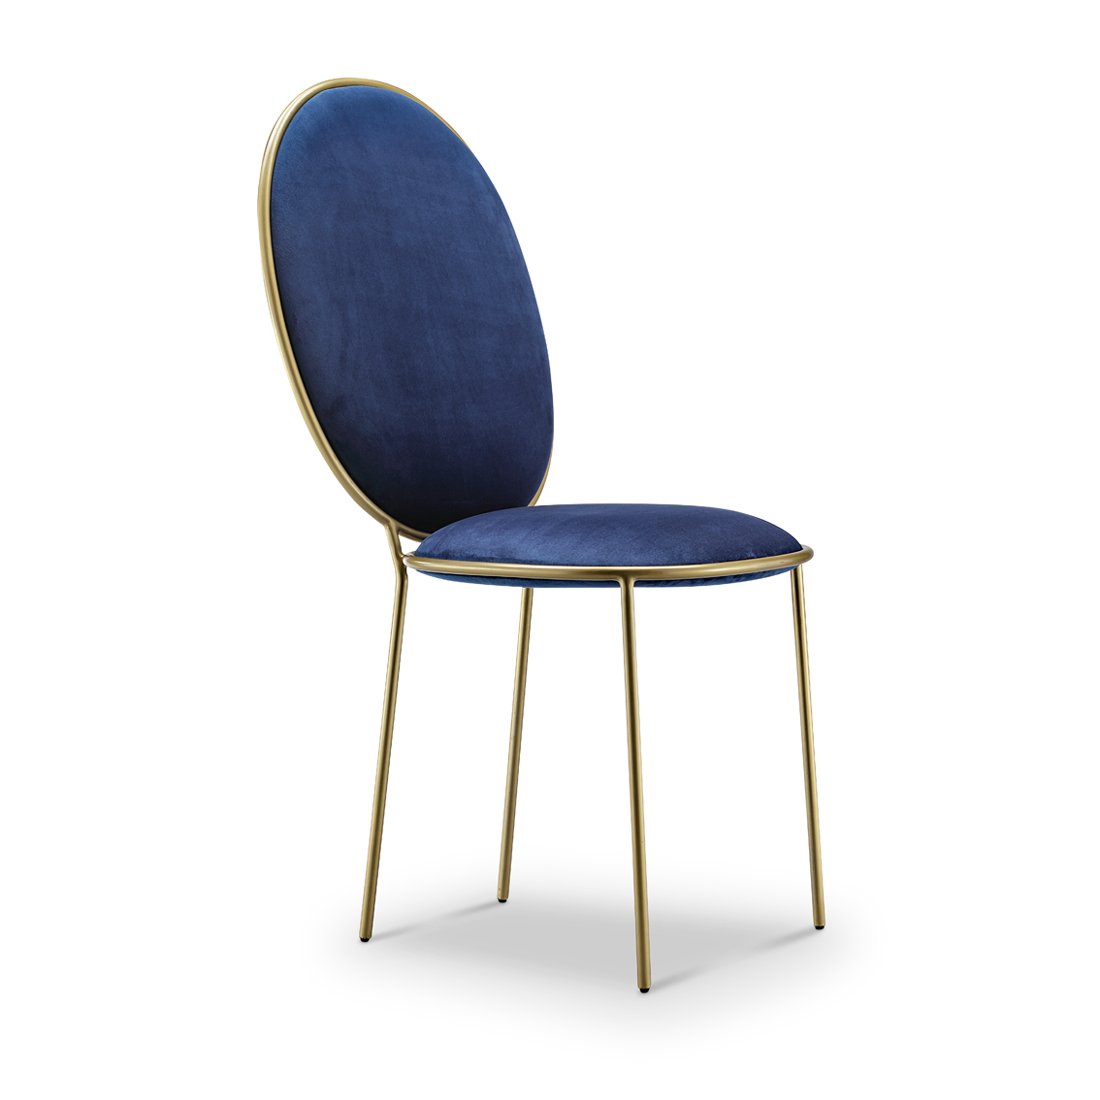 Replica Stay dining chair - blue